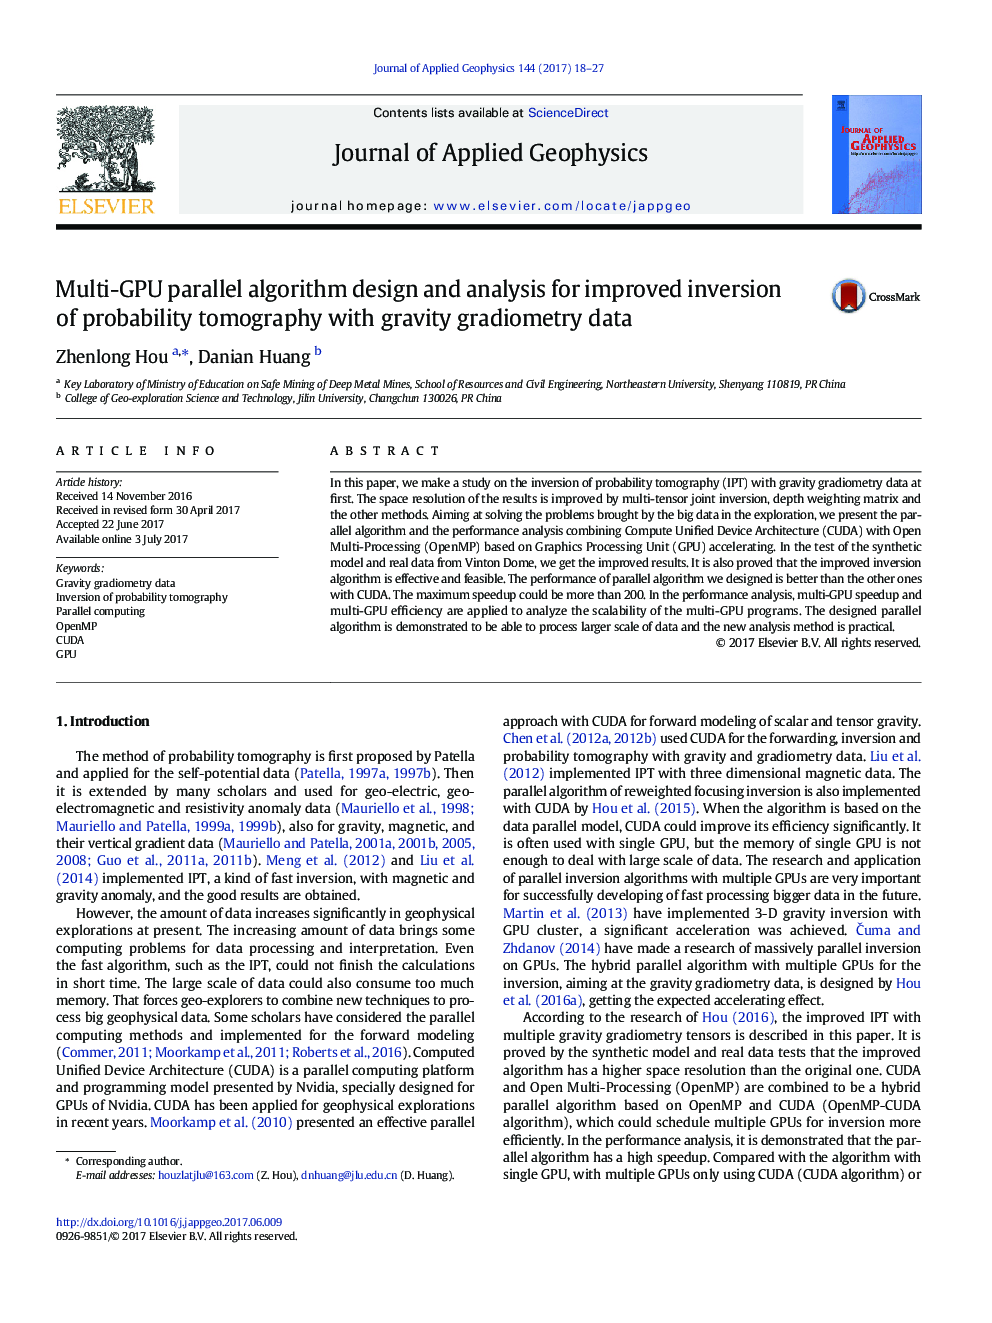 Multi-GPU parallel algorithm design and analysis for improved inversion of probability tomography with gravity gradiometry data